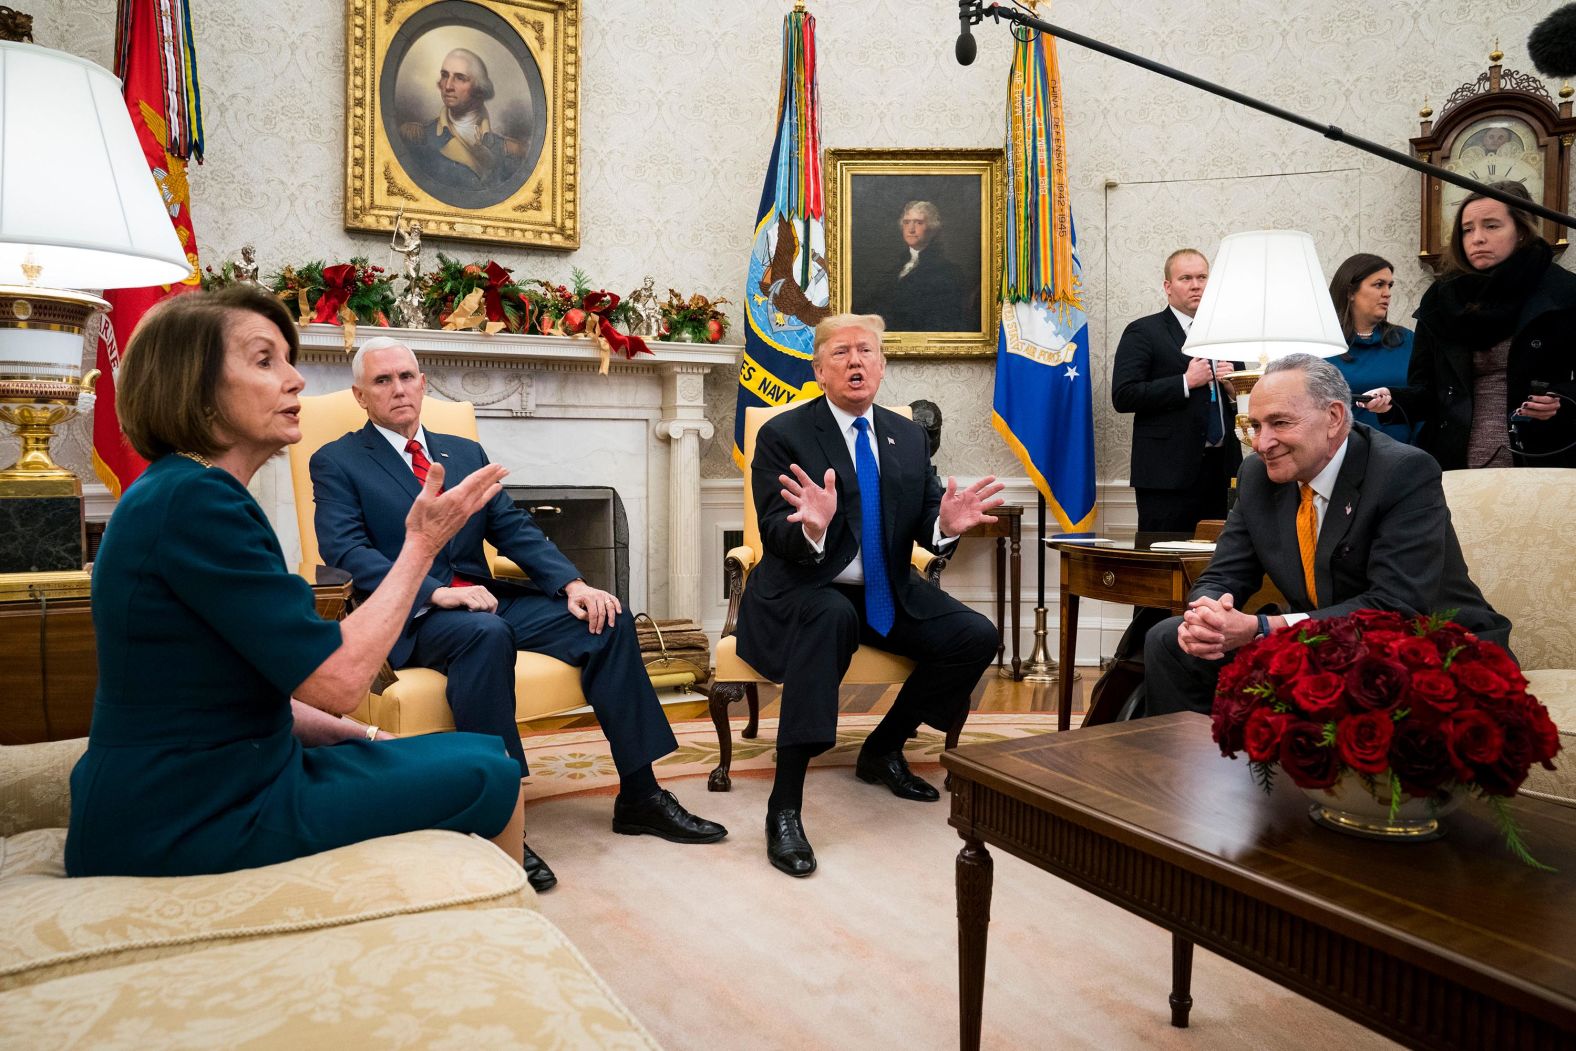 Trump and Vice President Mike Pence meet with House Minority Leader Nancy Pelosi and Senate Minority Leader Chuck Schumer at the White House in December 2018. In the meeting, part of which was open to the press, <a href="index.php?page=&url=https%3A%2F%2Fwww.cnn.com%2F2018%2F12%2F11%2Fpolitics%2Ftrump-pelosi-schumer-meeting-shutdown%2Findex.html" target="_blank">Trump clashed with Schumer and Pelosi over funding for a border wall </a>and the threat of a government shutdown. Parts of the federal government did eventually shut down. <a href="index.php?page=&url=https%3A%2F%2Fwww.cnn.com%2F2018%2F12%2F22%2Fpolitics%2Fgallery%2Fgovernment-shutdown-december-2018%2Findex.html" target="_blank">The shutdown</a> lasted a record 35 days.